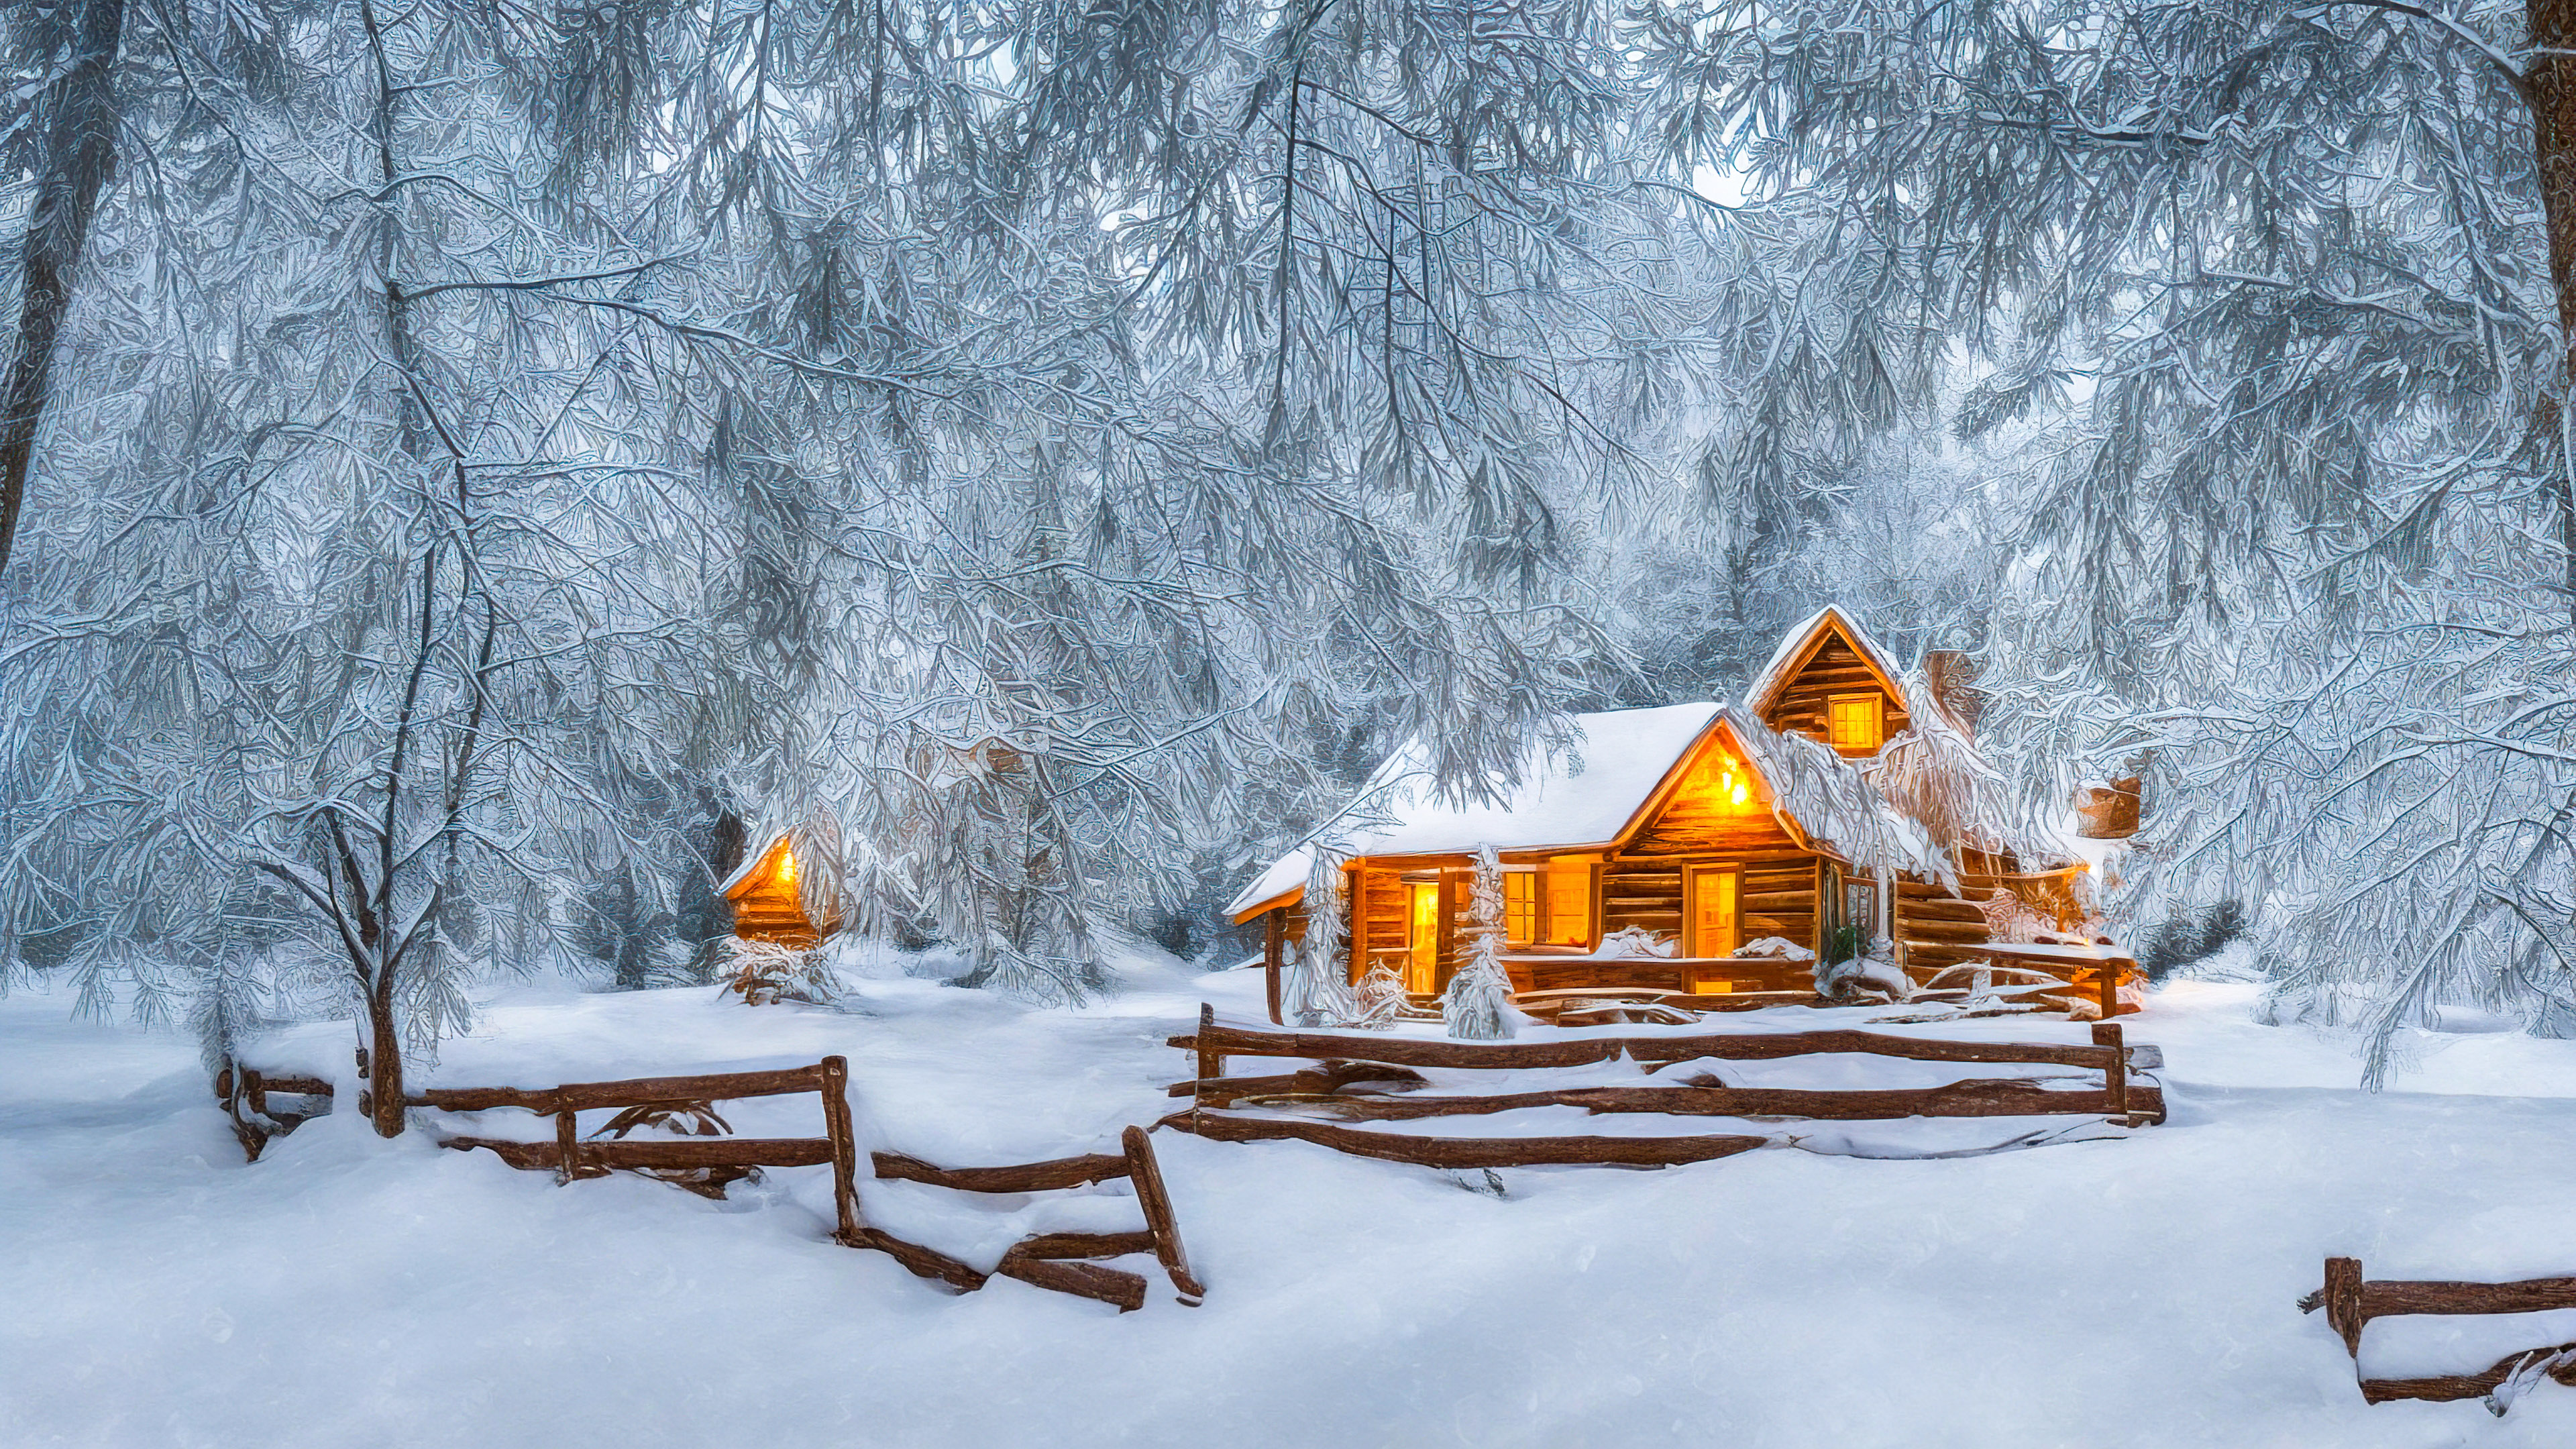 hd wallpapers 1920x1080 of nature with winter, snow-covered trees and cabin adorned with holiday lights